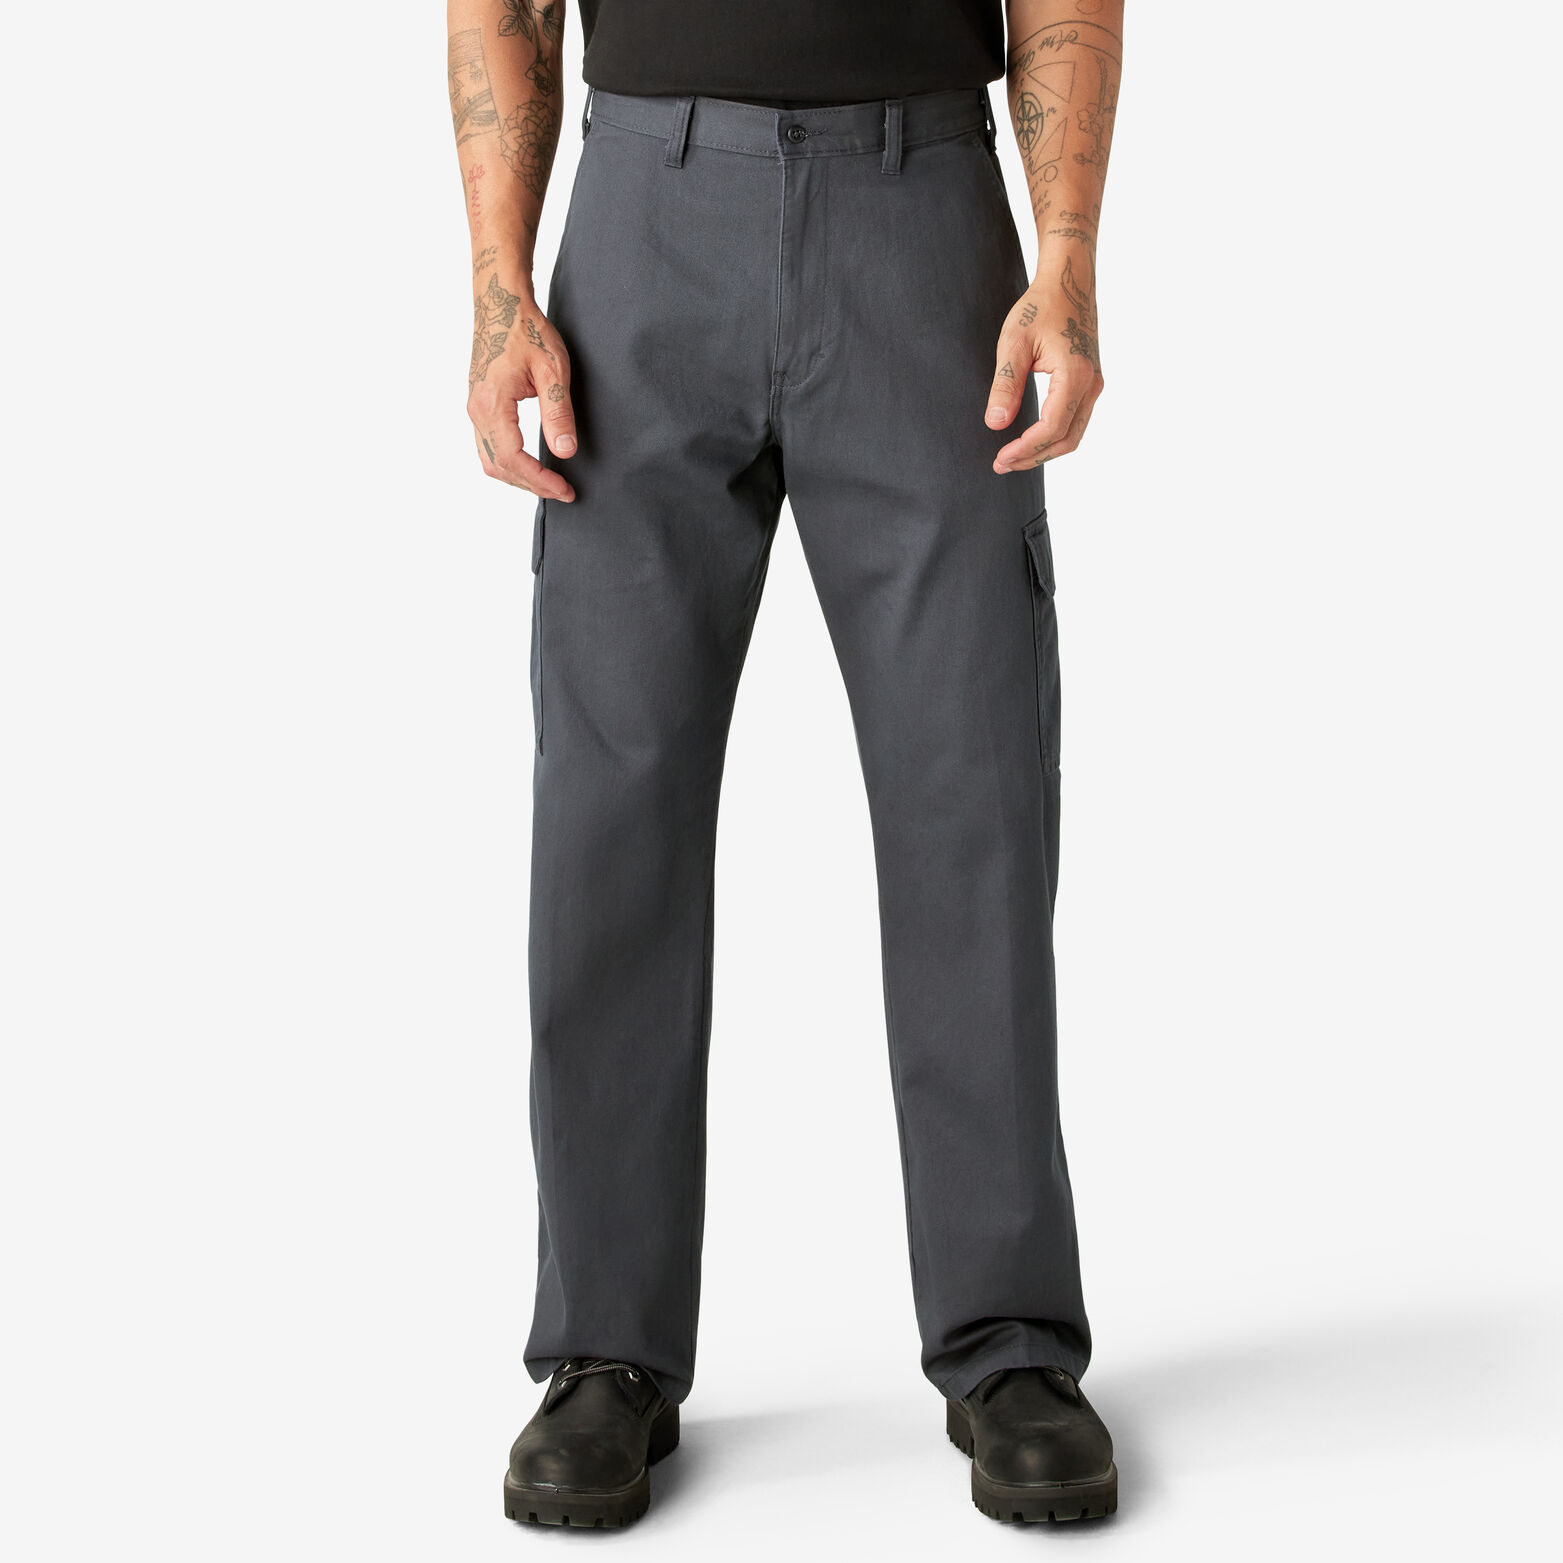 Loose Fit Cargo Pants For Men Rinsed Charcoal Gray | Dickies